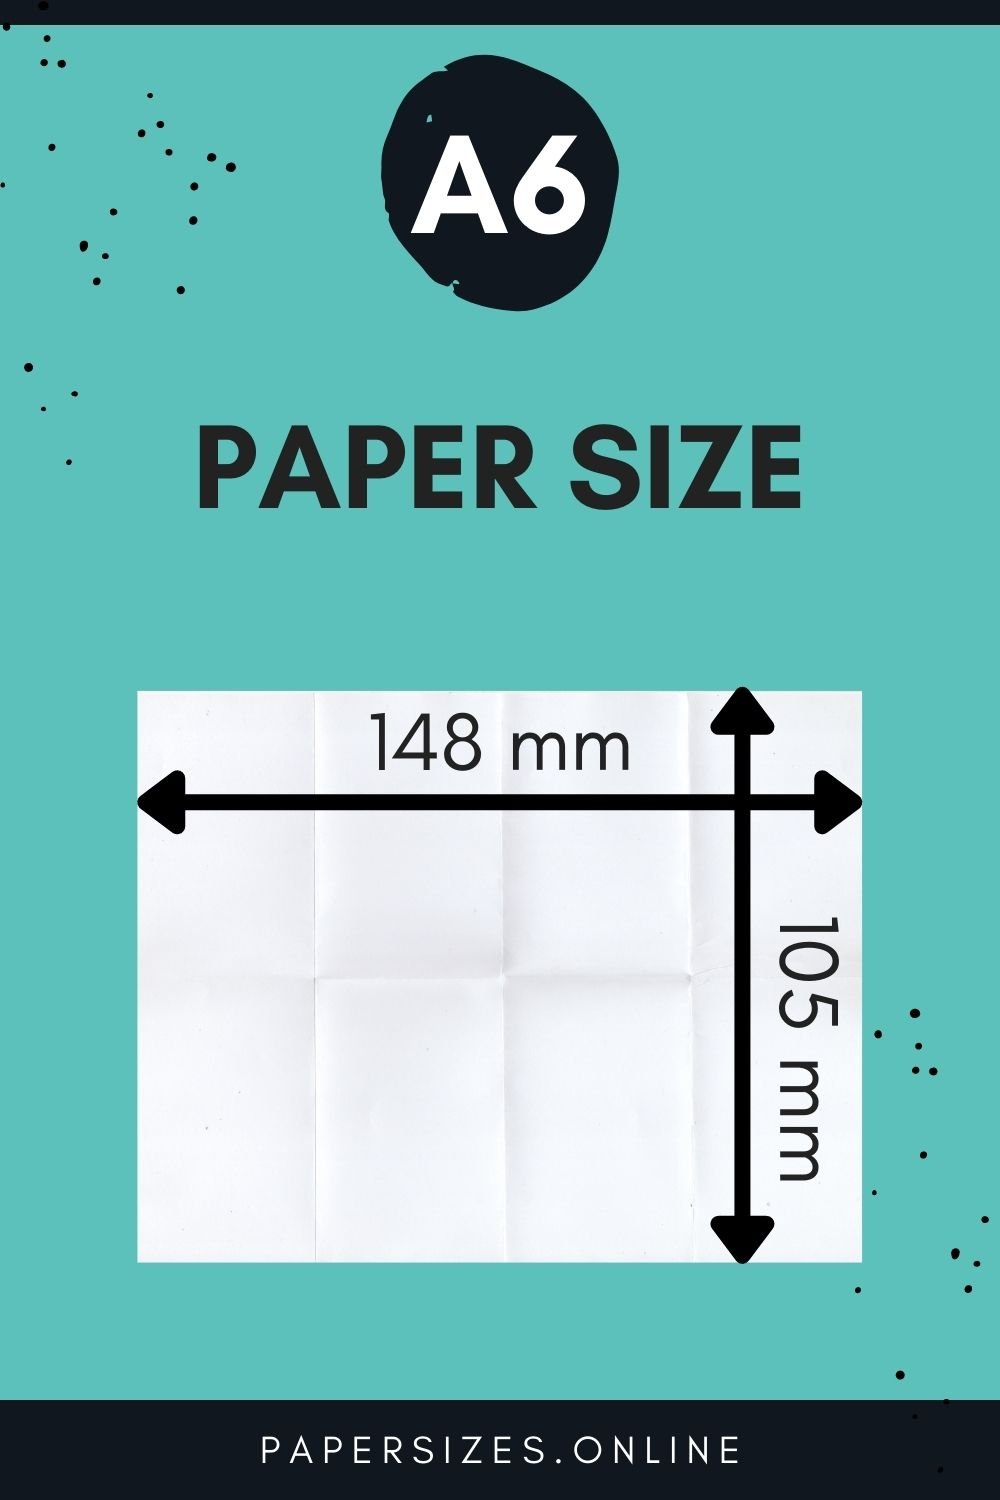 A6 Paper Size in mm